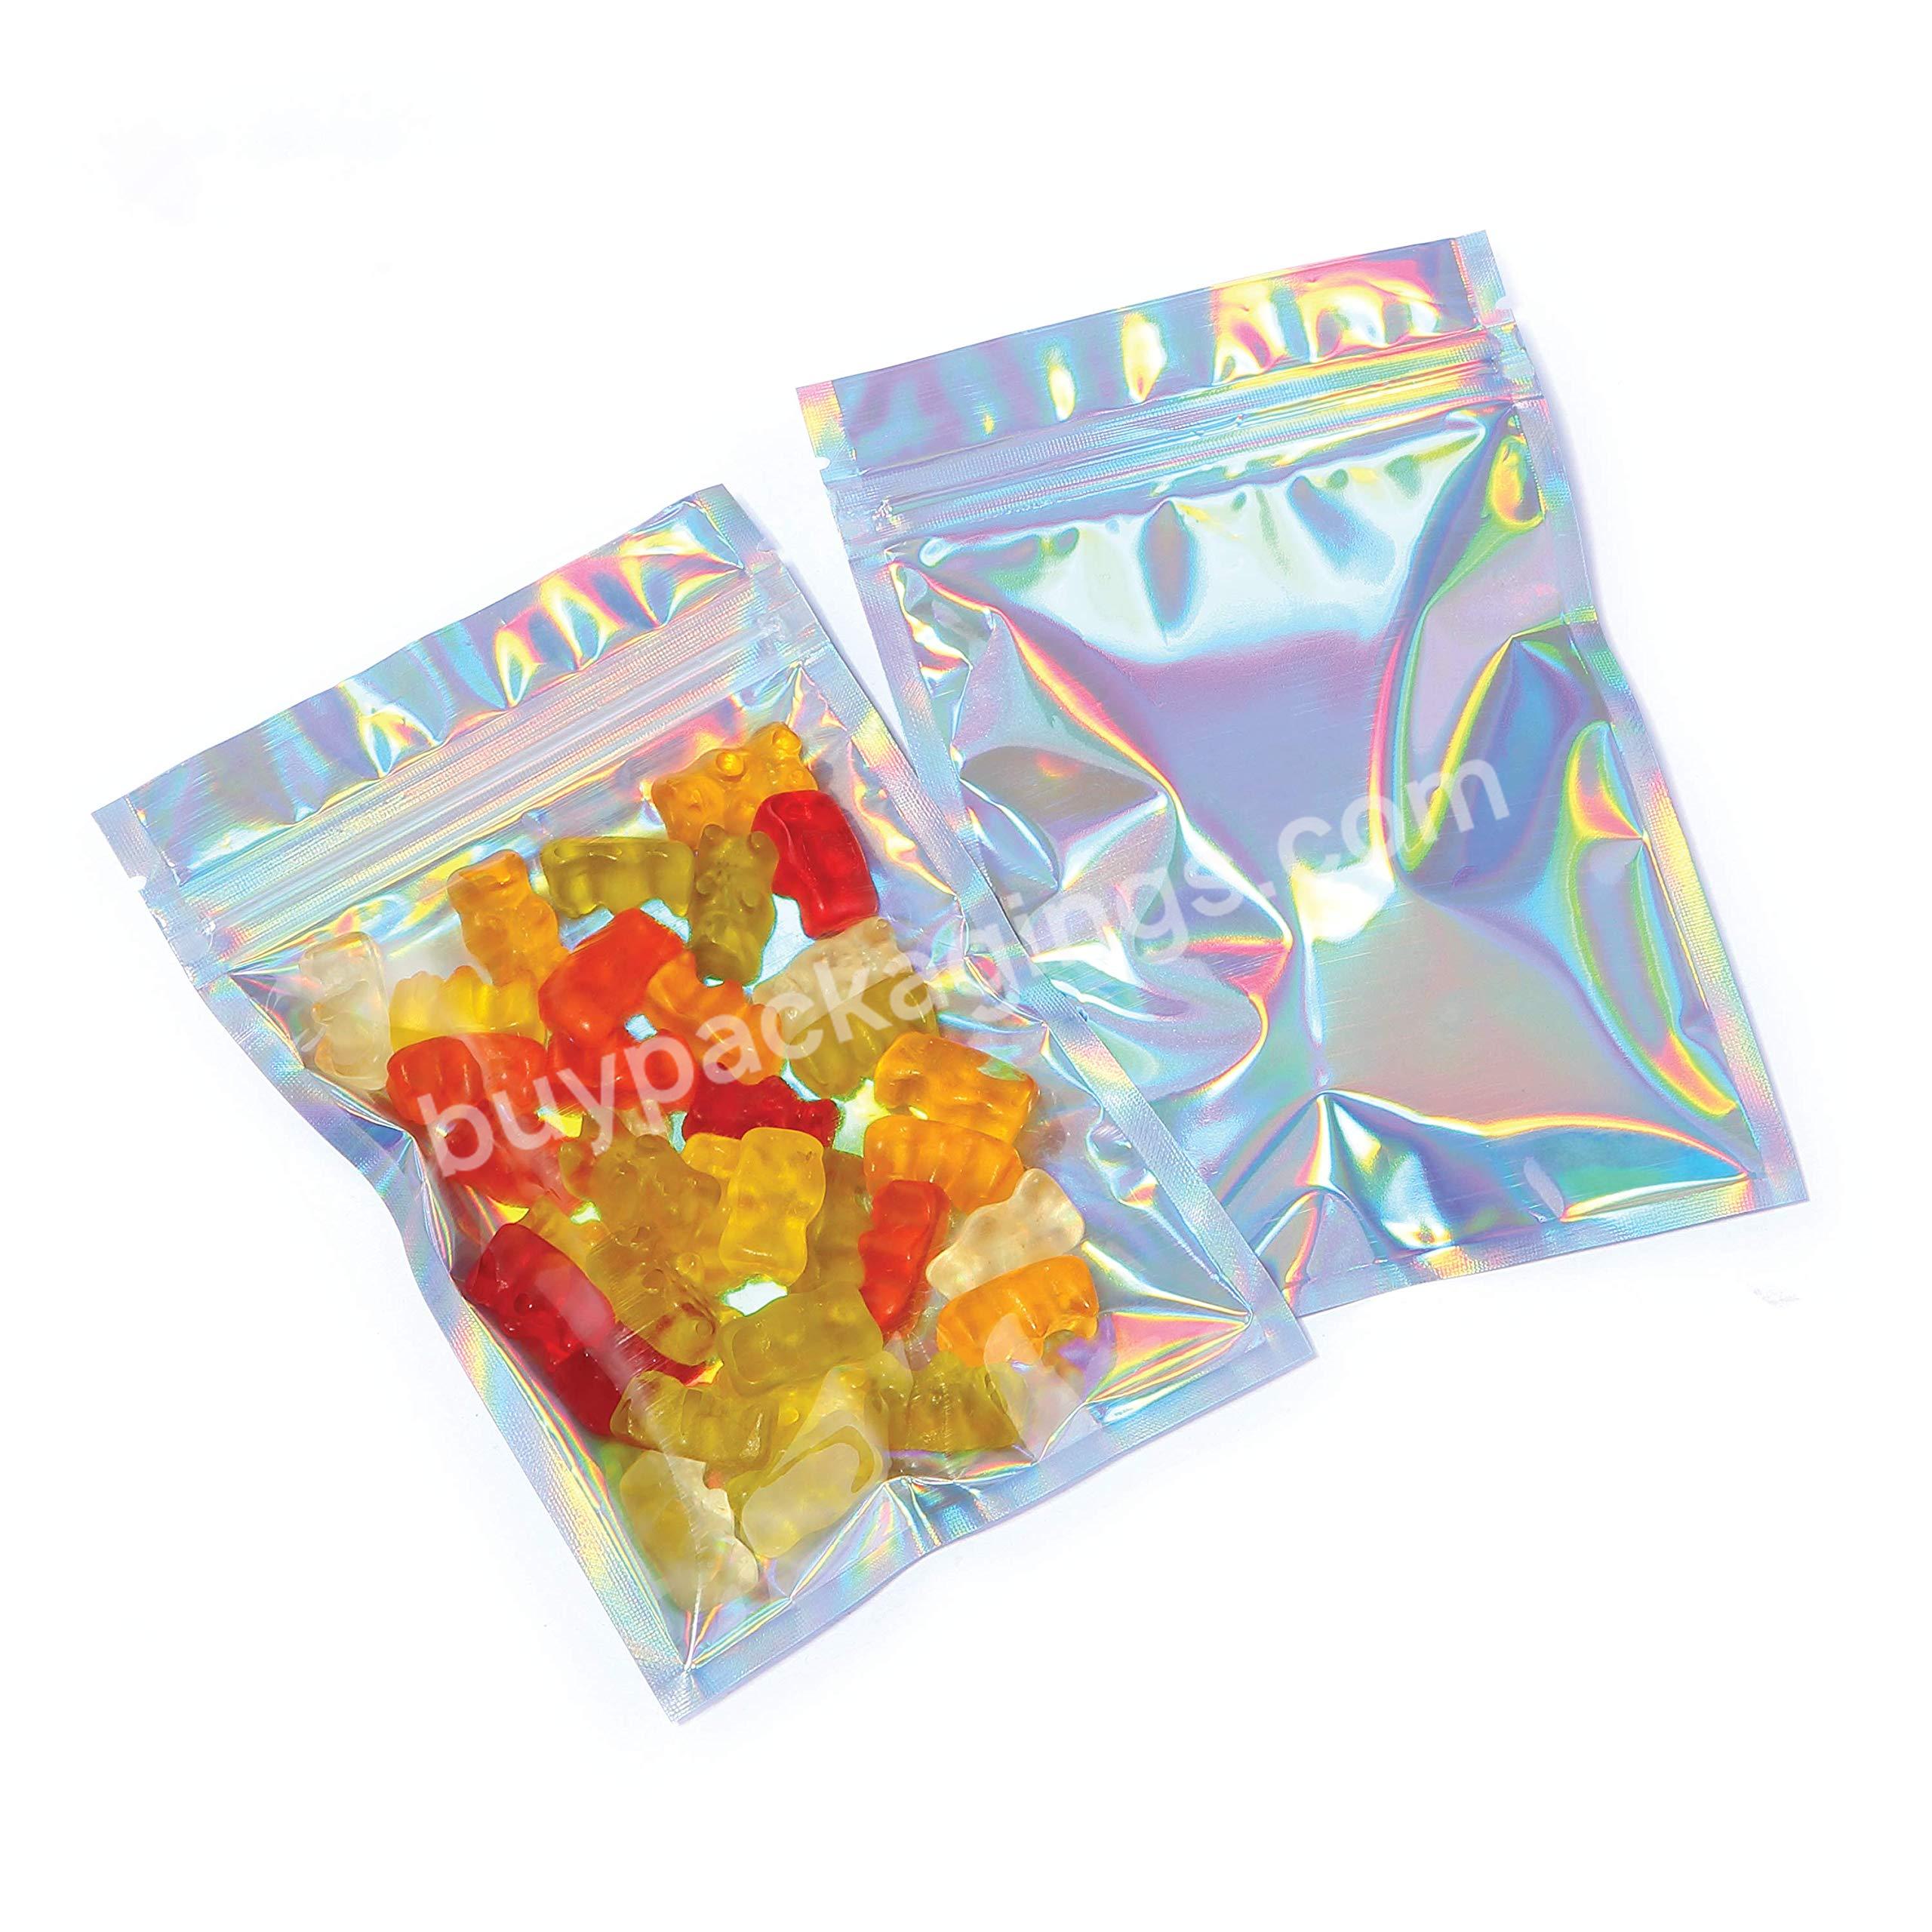 Clear Front Mylar Bags With Ziplock Rainbow Holographic Sealable Heat Seal Bag For Candy And Food Packaging - Buy Rainbow Holographic Sealable Heat Seal Bag,Bag For Candy And Food Packaging,Mylar Bags With Ziplock.